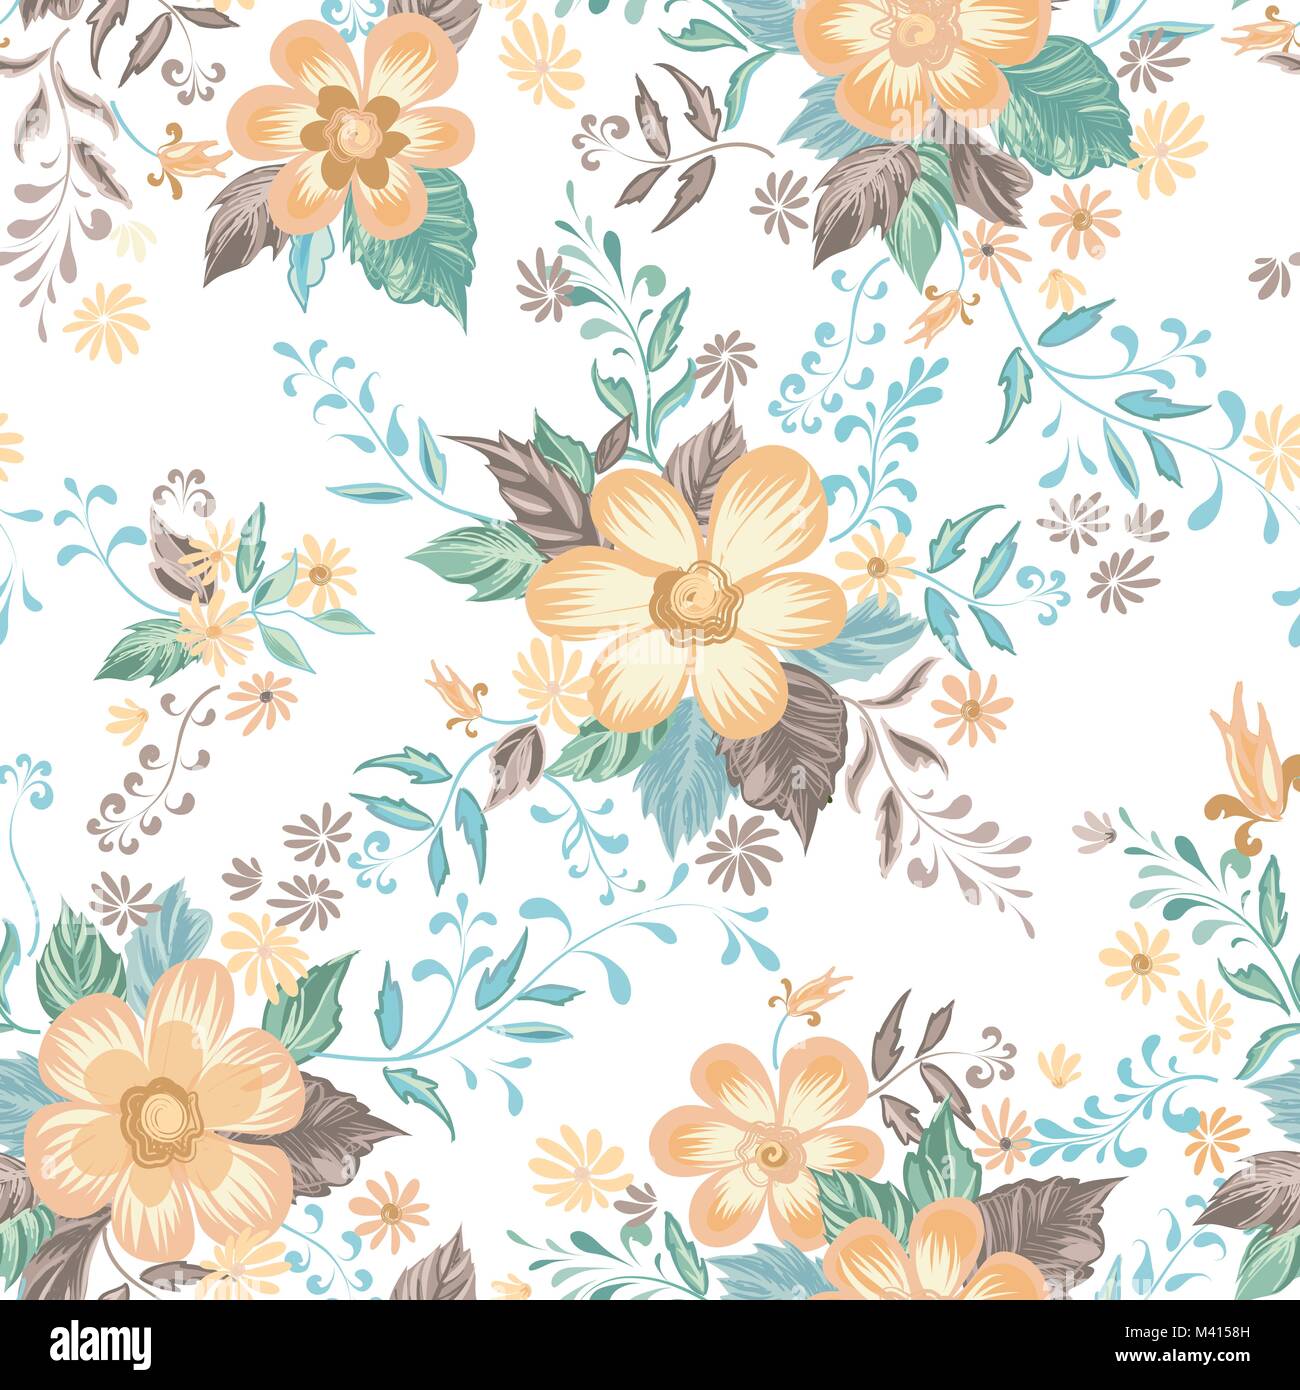 Floral seamless pattern. Flower background. Abstract ornamental flourish wallpaper with flowers. Stock Vector